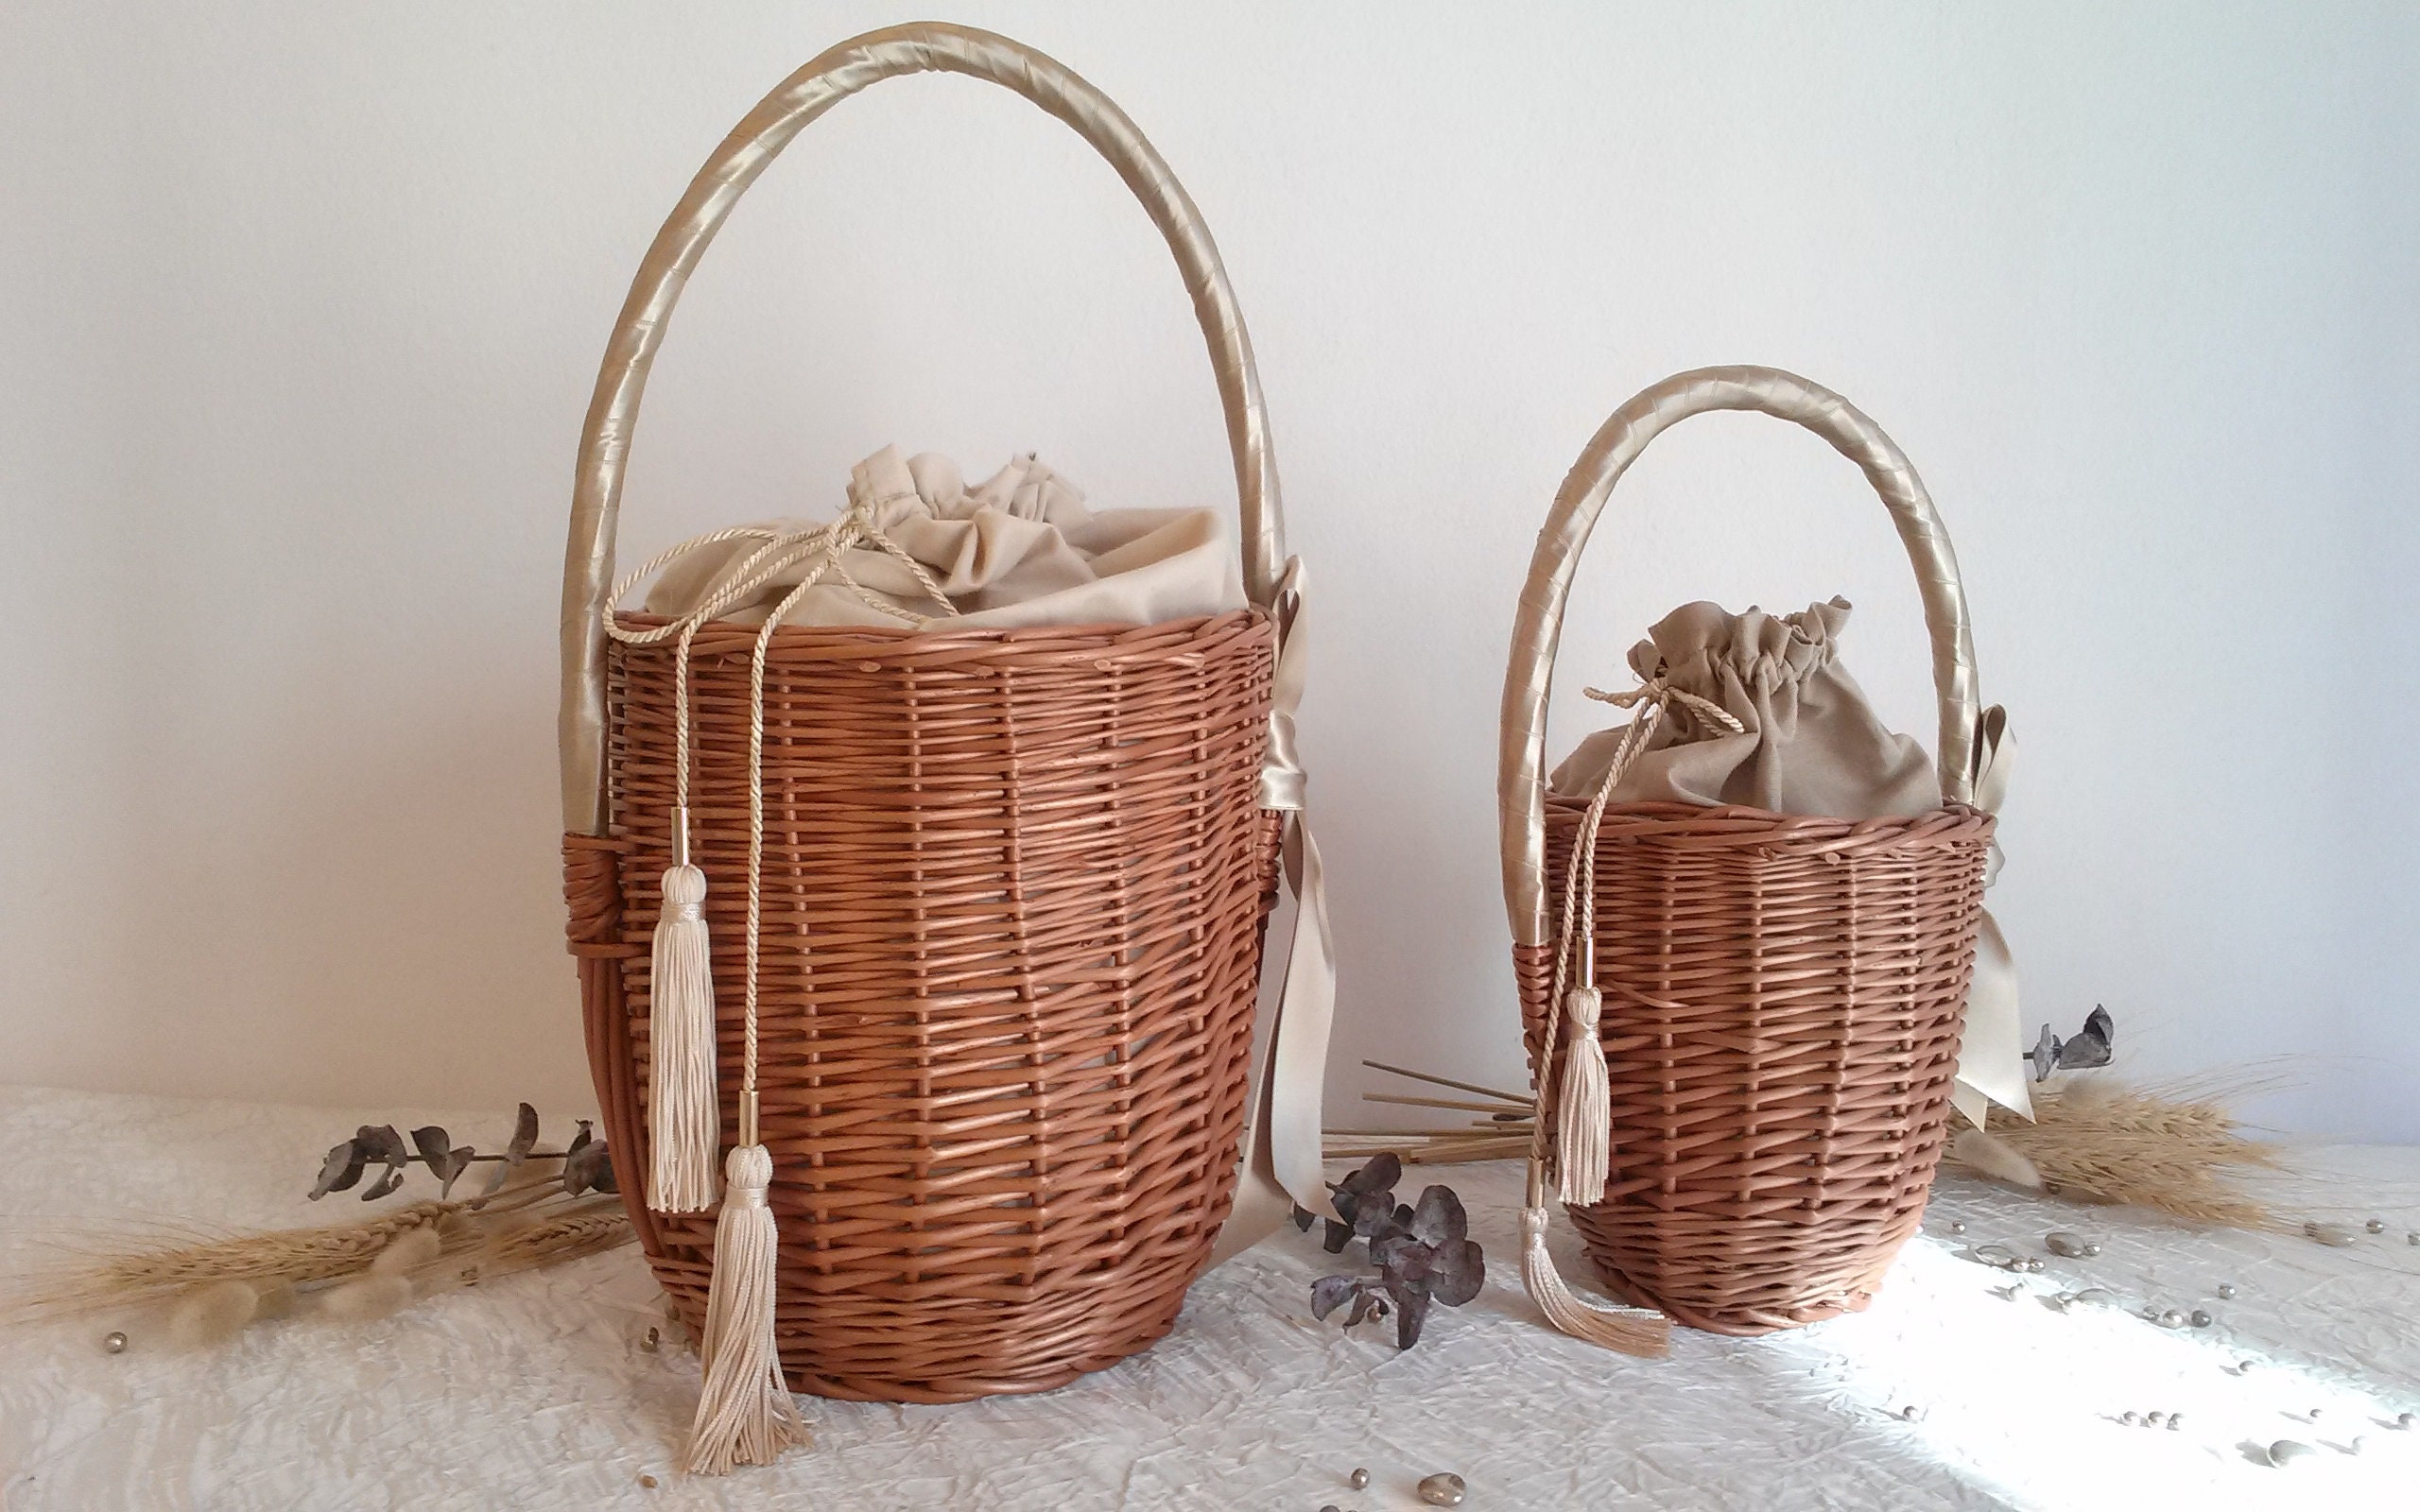 12 Wicker Basket Bags that Give a Nod to Jane Birkin's Signature Tote